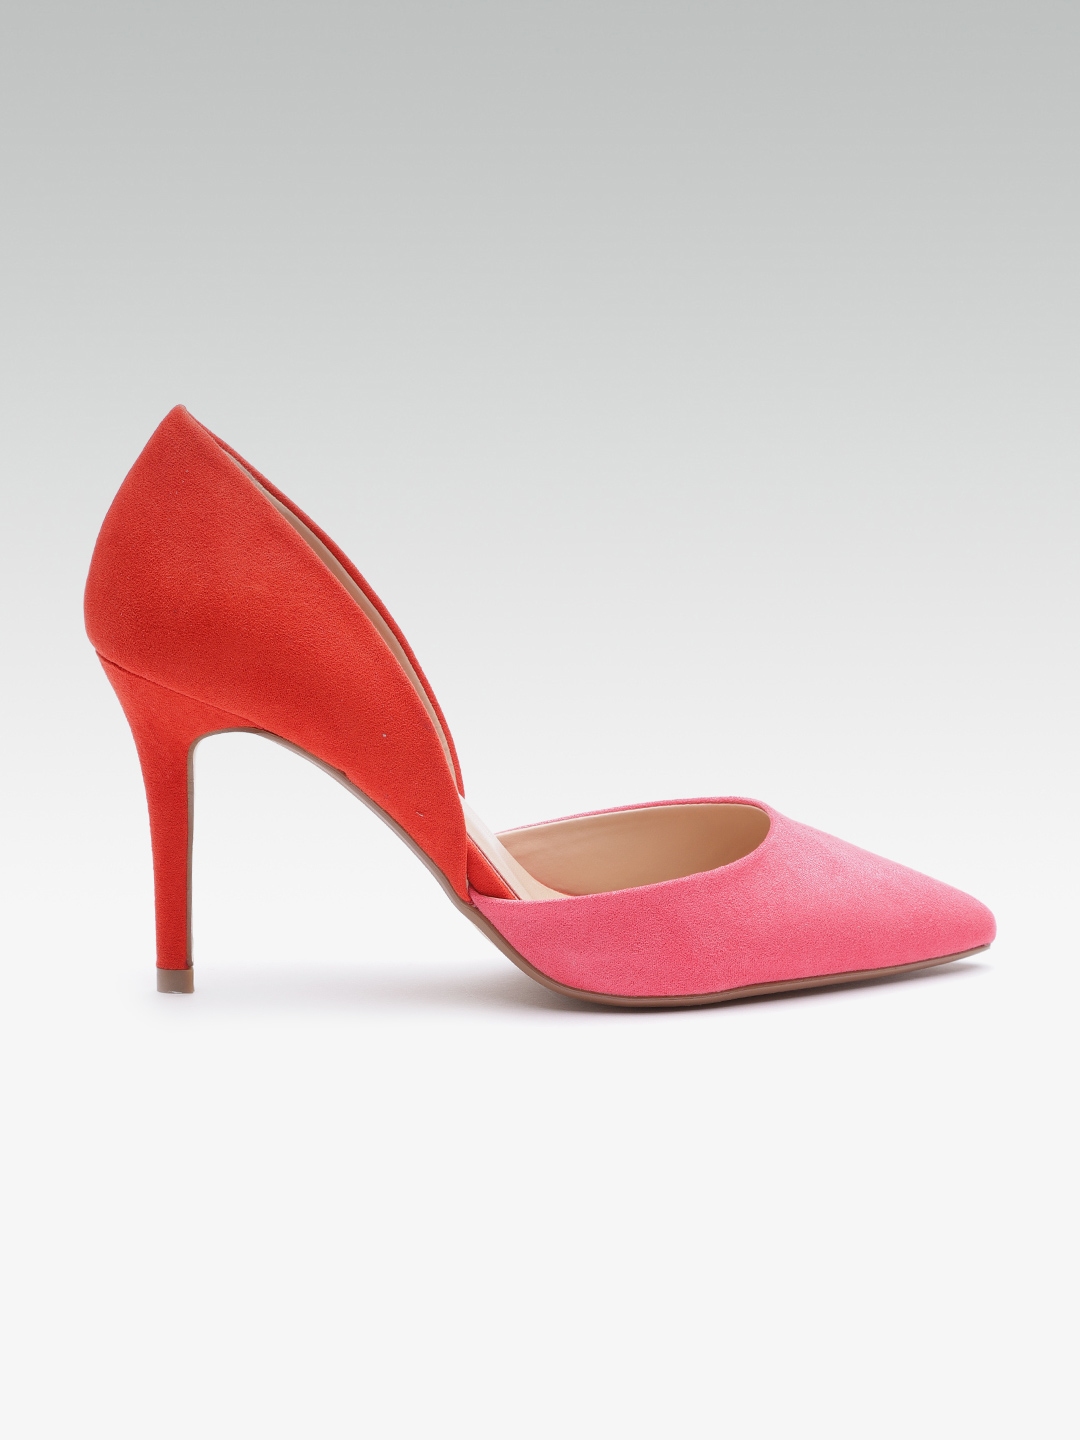 Buy Dorothy Perkins Women Pink And Red Colourblocked Pumps Heels For Women 6816403 Myntra 3773